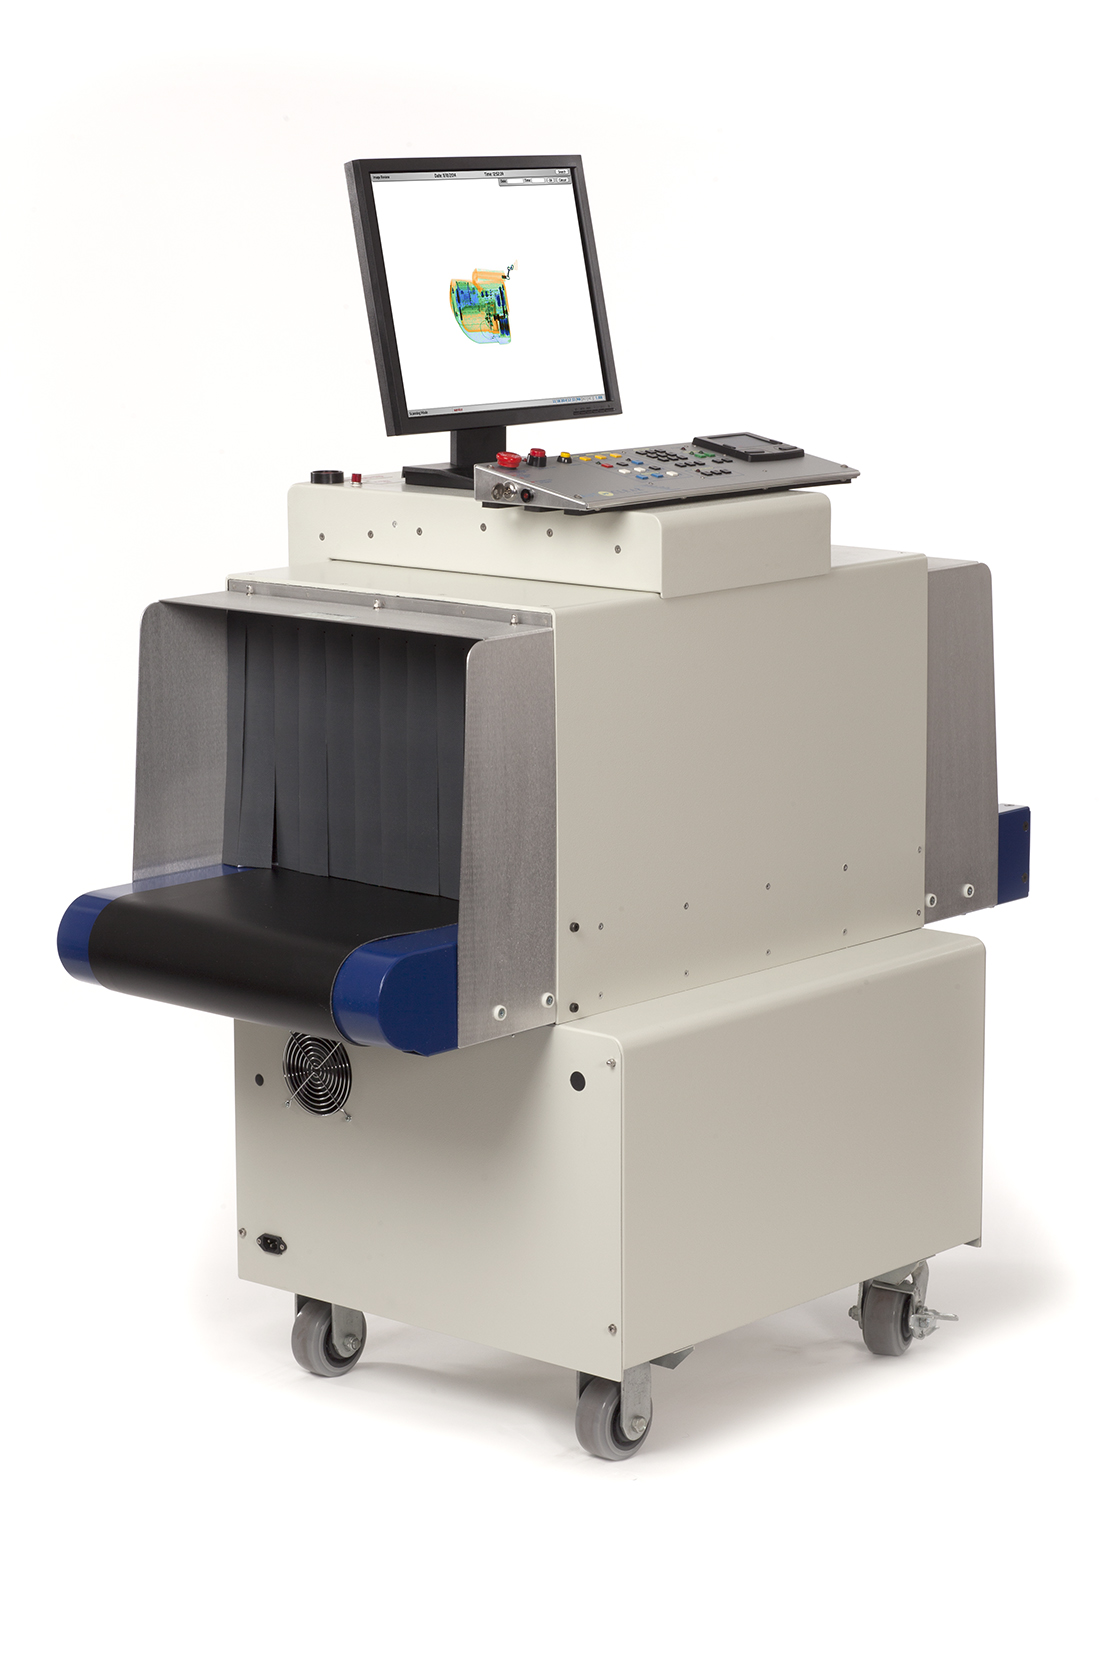 Autoclear 5333 X-ray security scanner